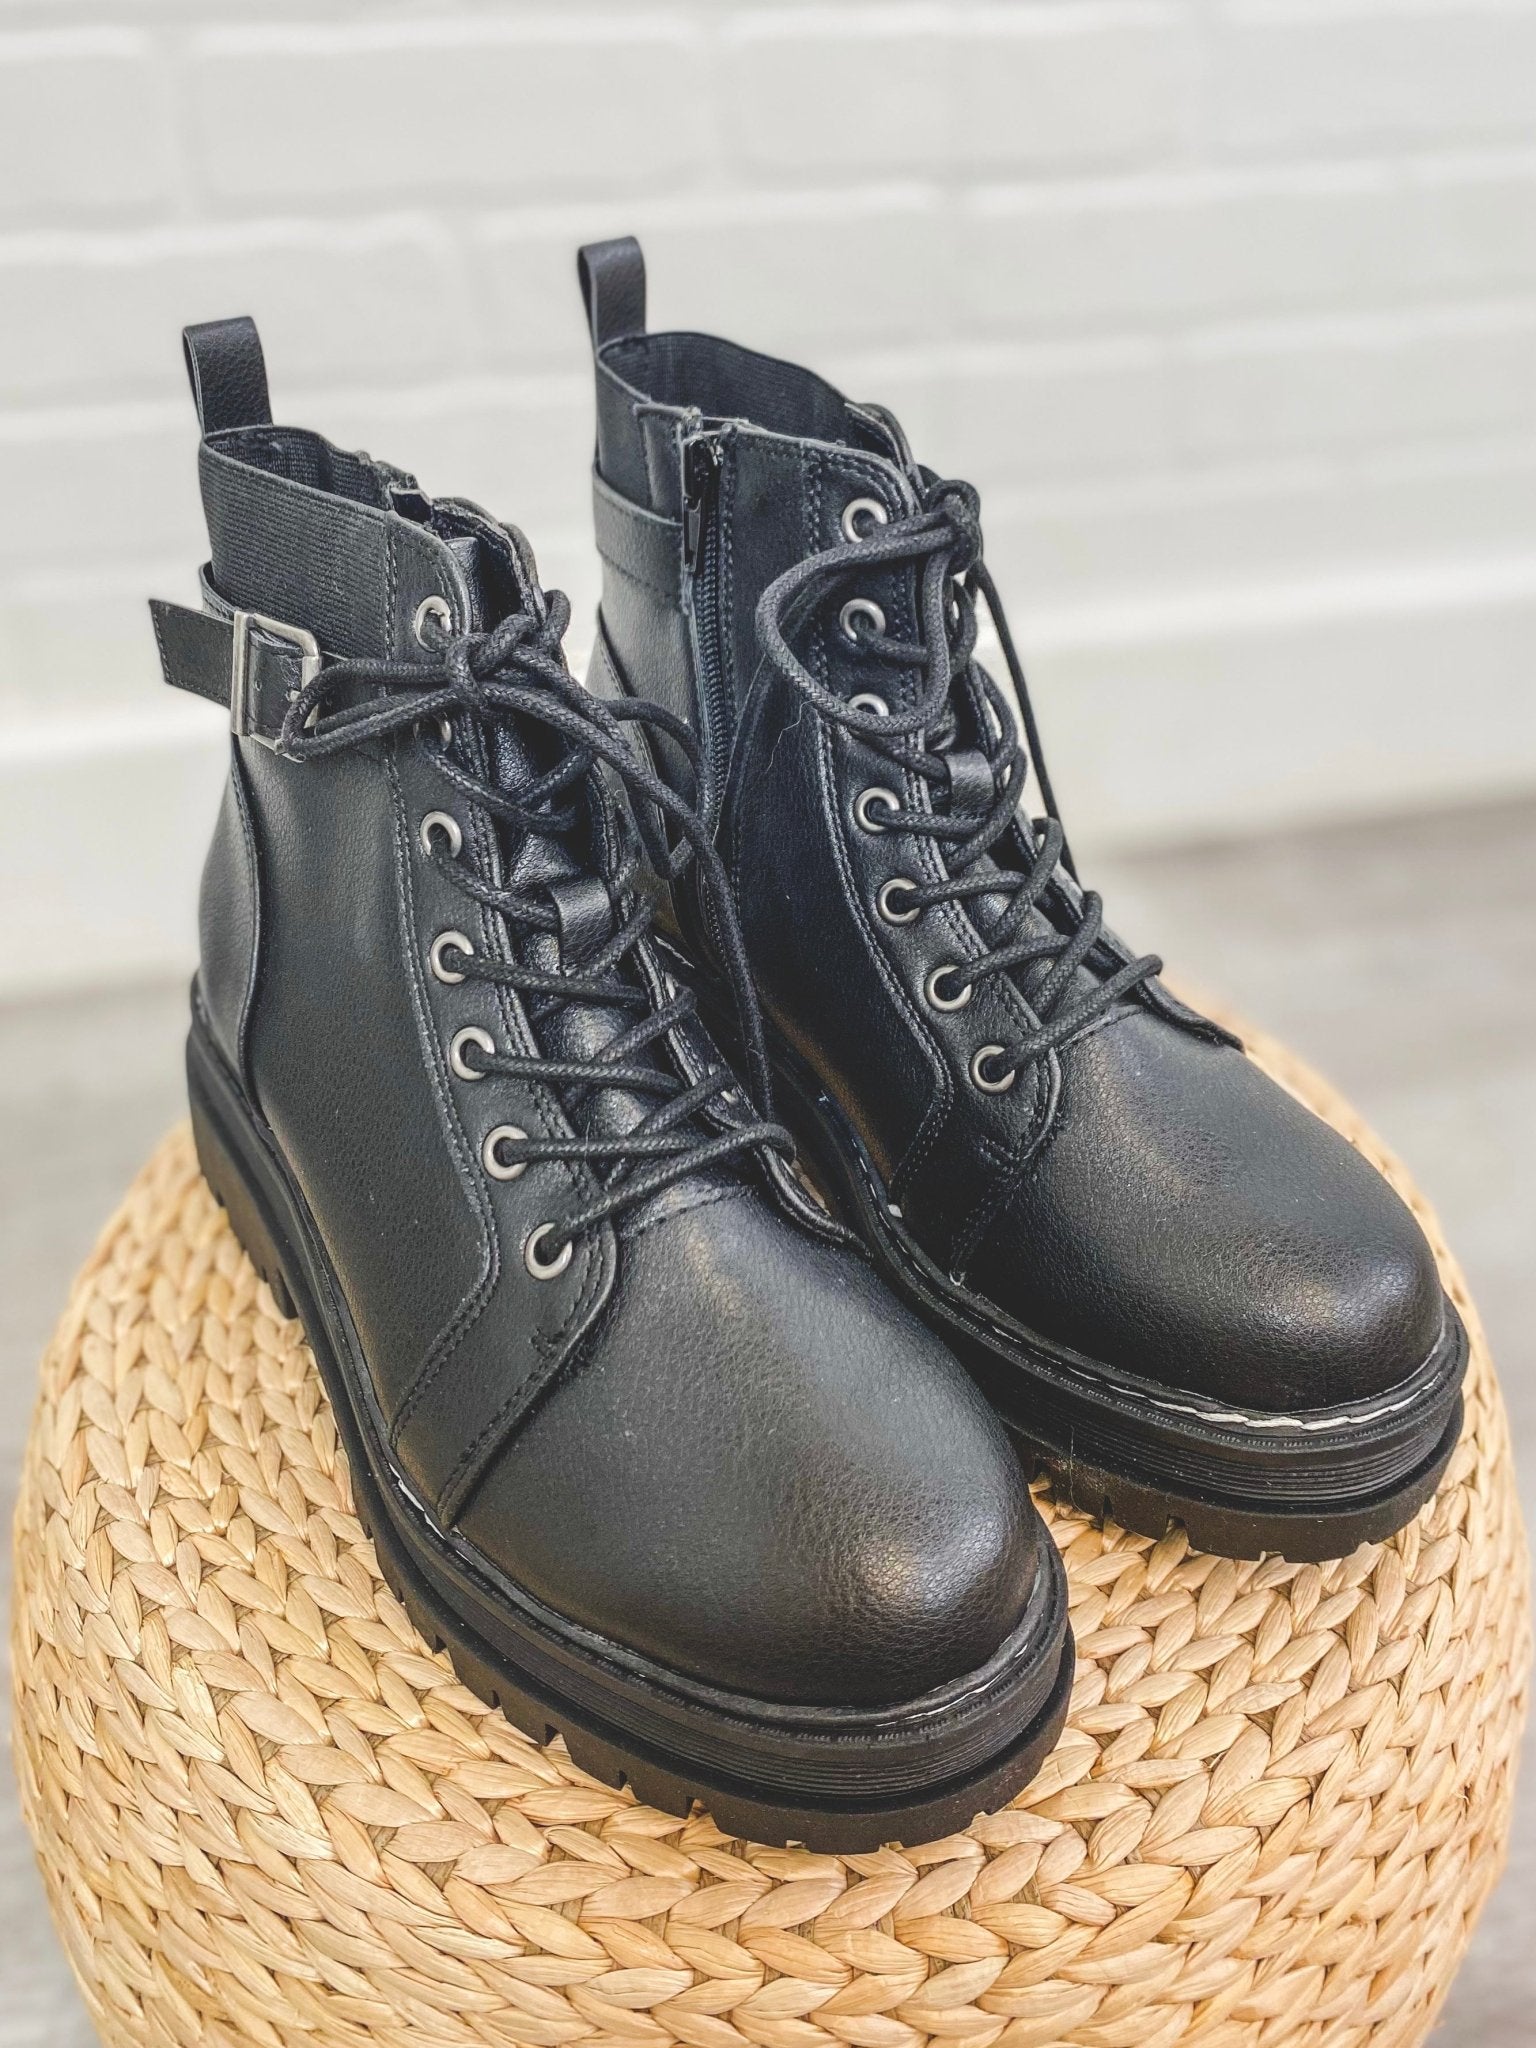 Lace up combat boots black - Trendy Shoes - Fashion Shoes at Lush Fashion Lounge Boutique in Oklahoma City